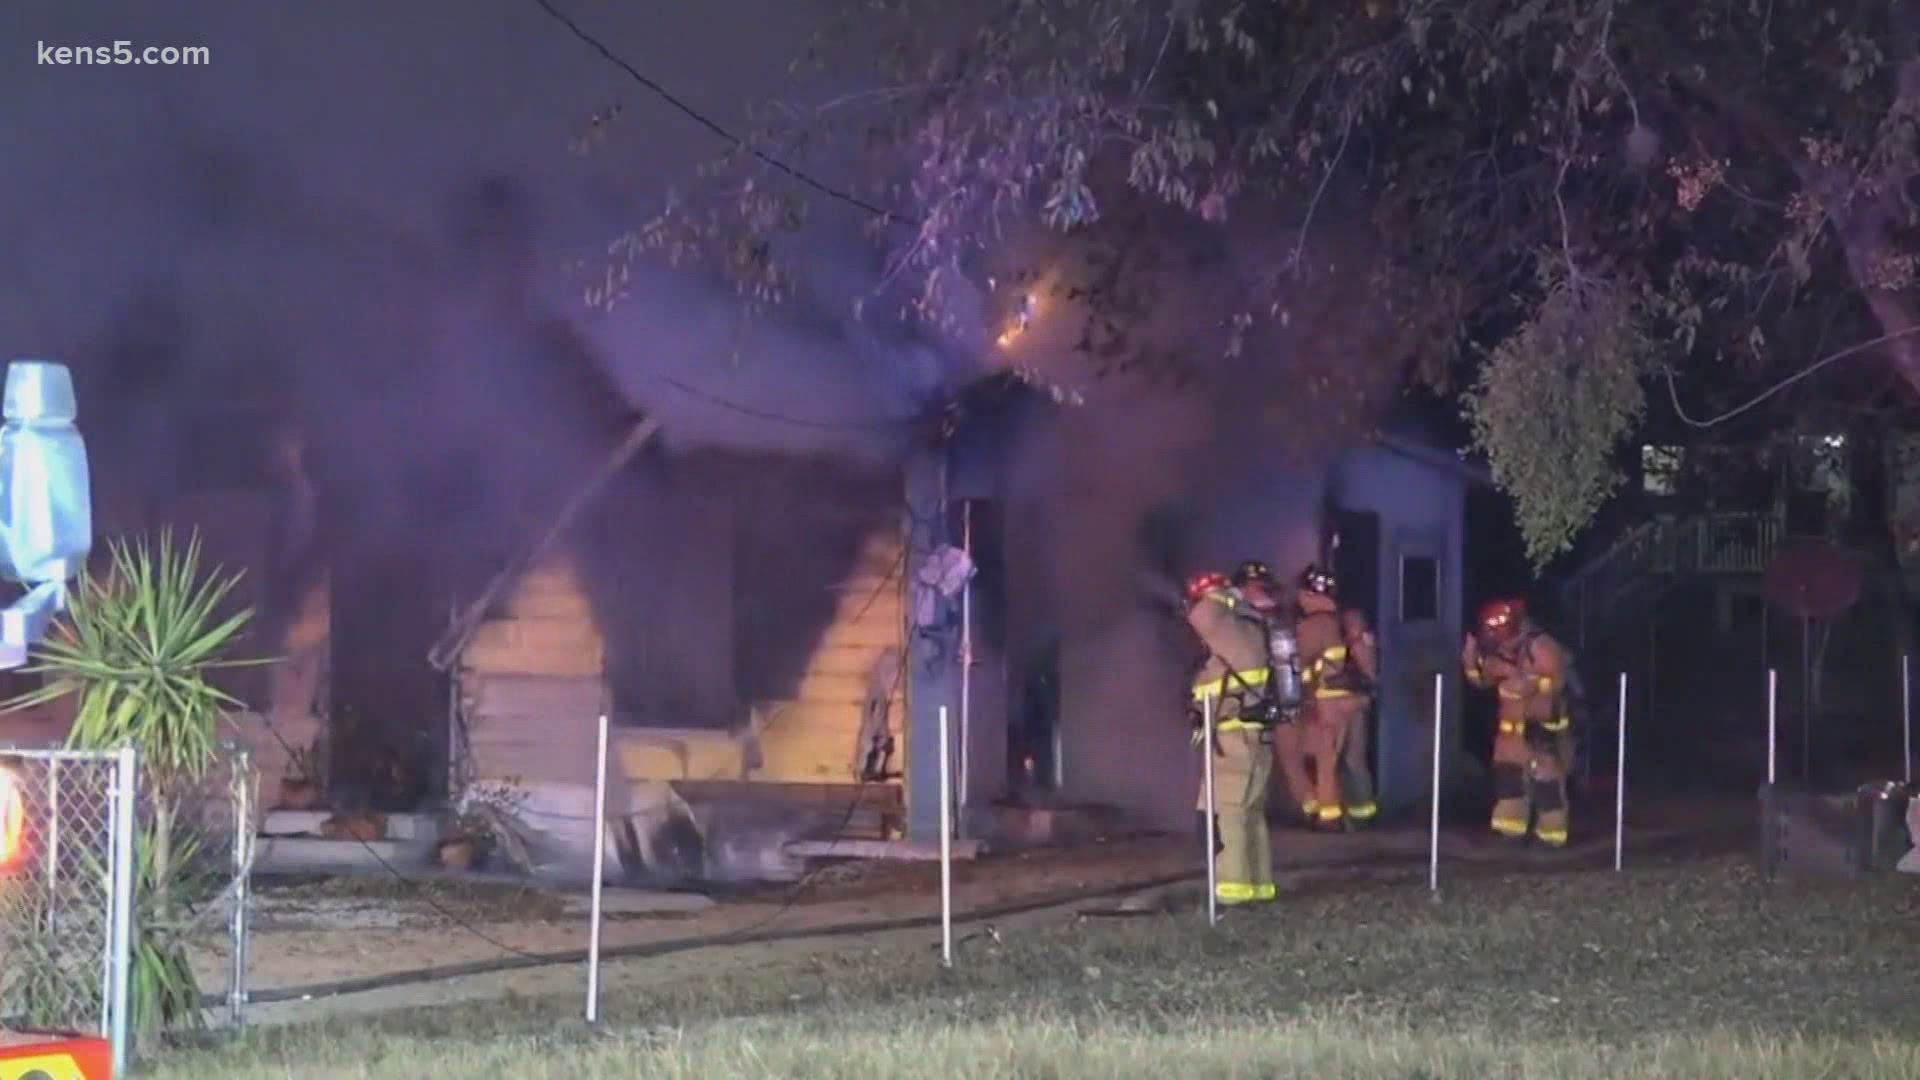 A home was badly damaged after a house fire on the city's southwest side, the San Antonio Fire Department said.